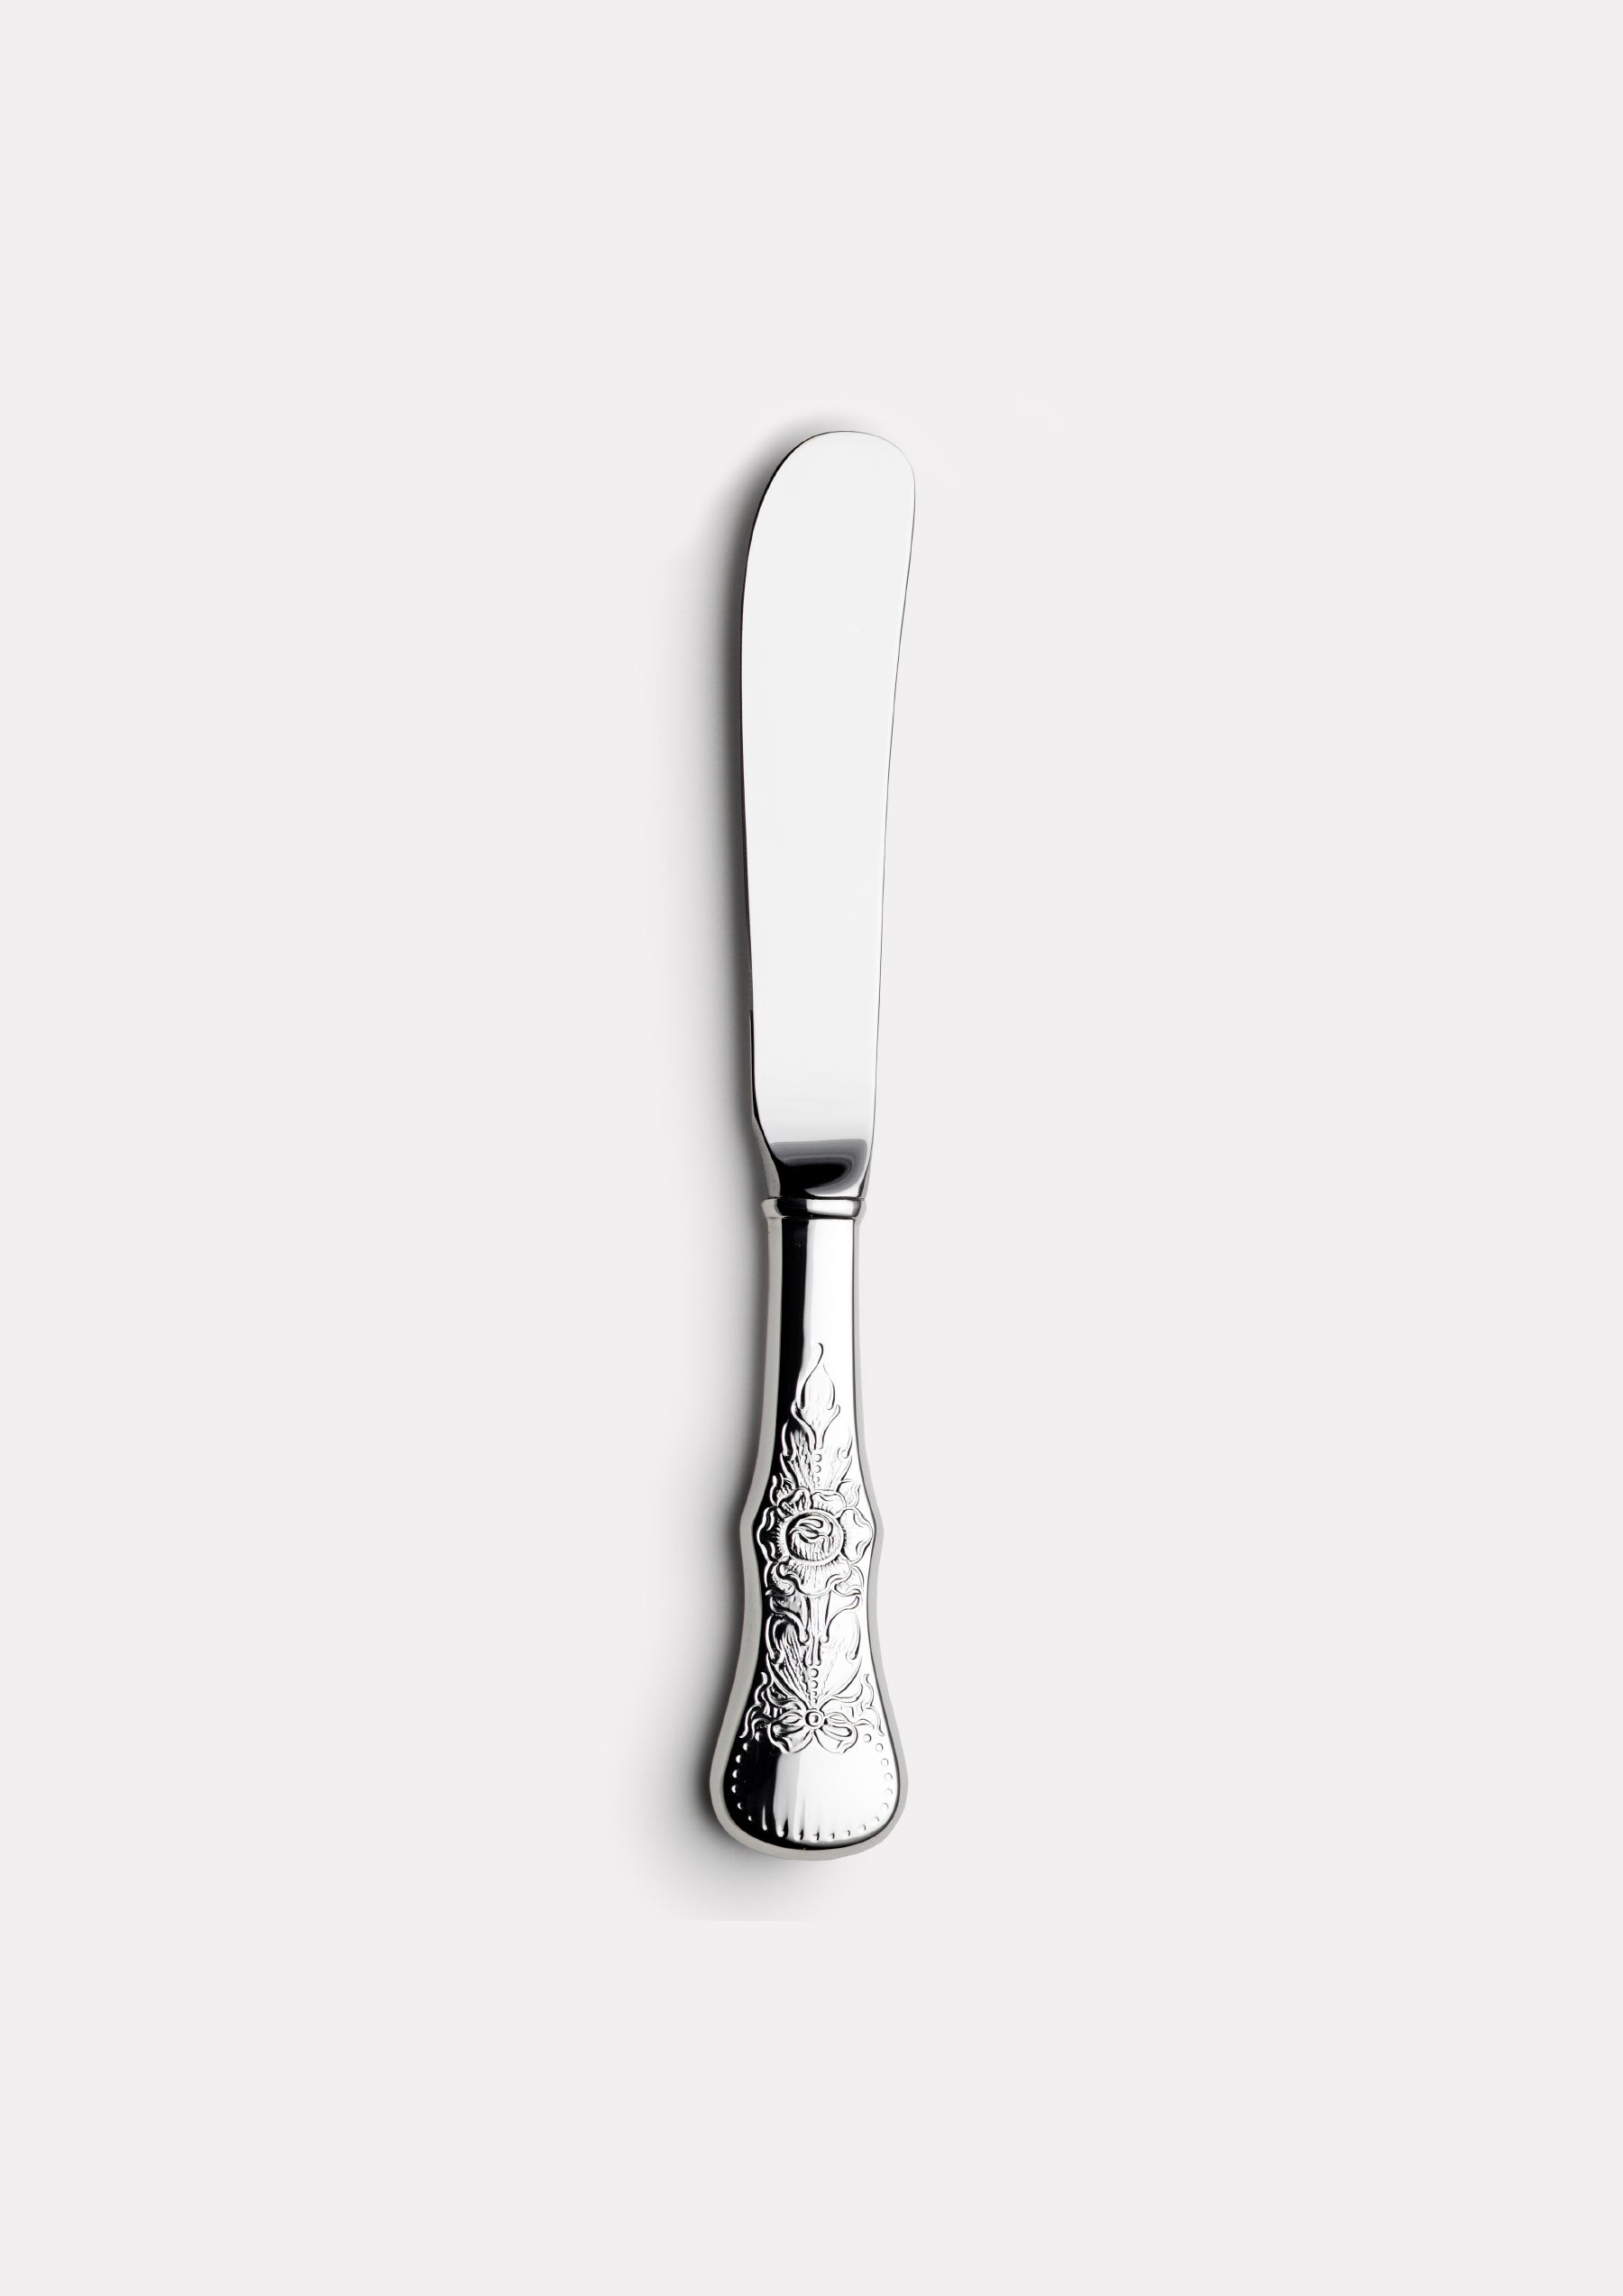 Rose butter knife with steel blade